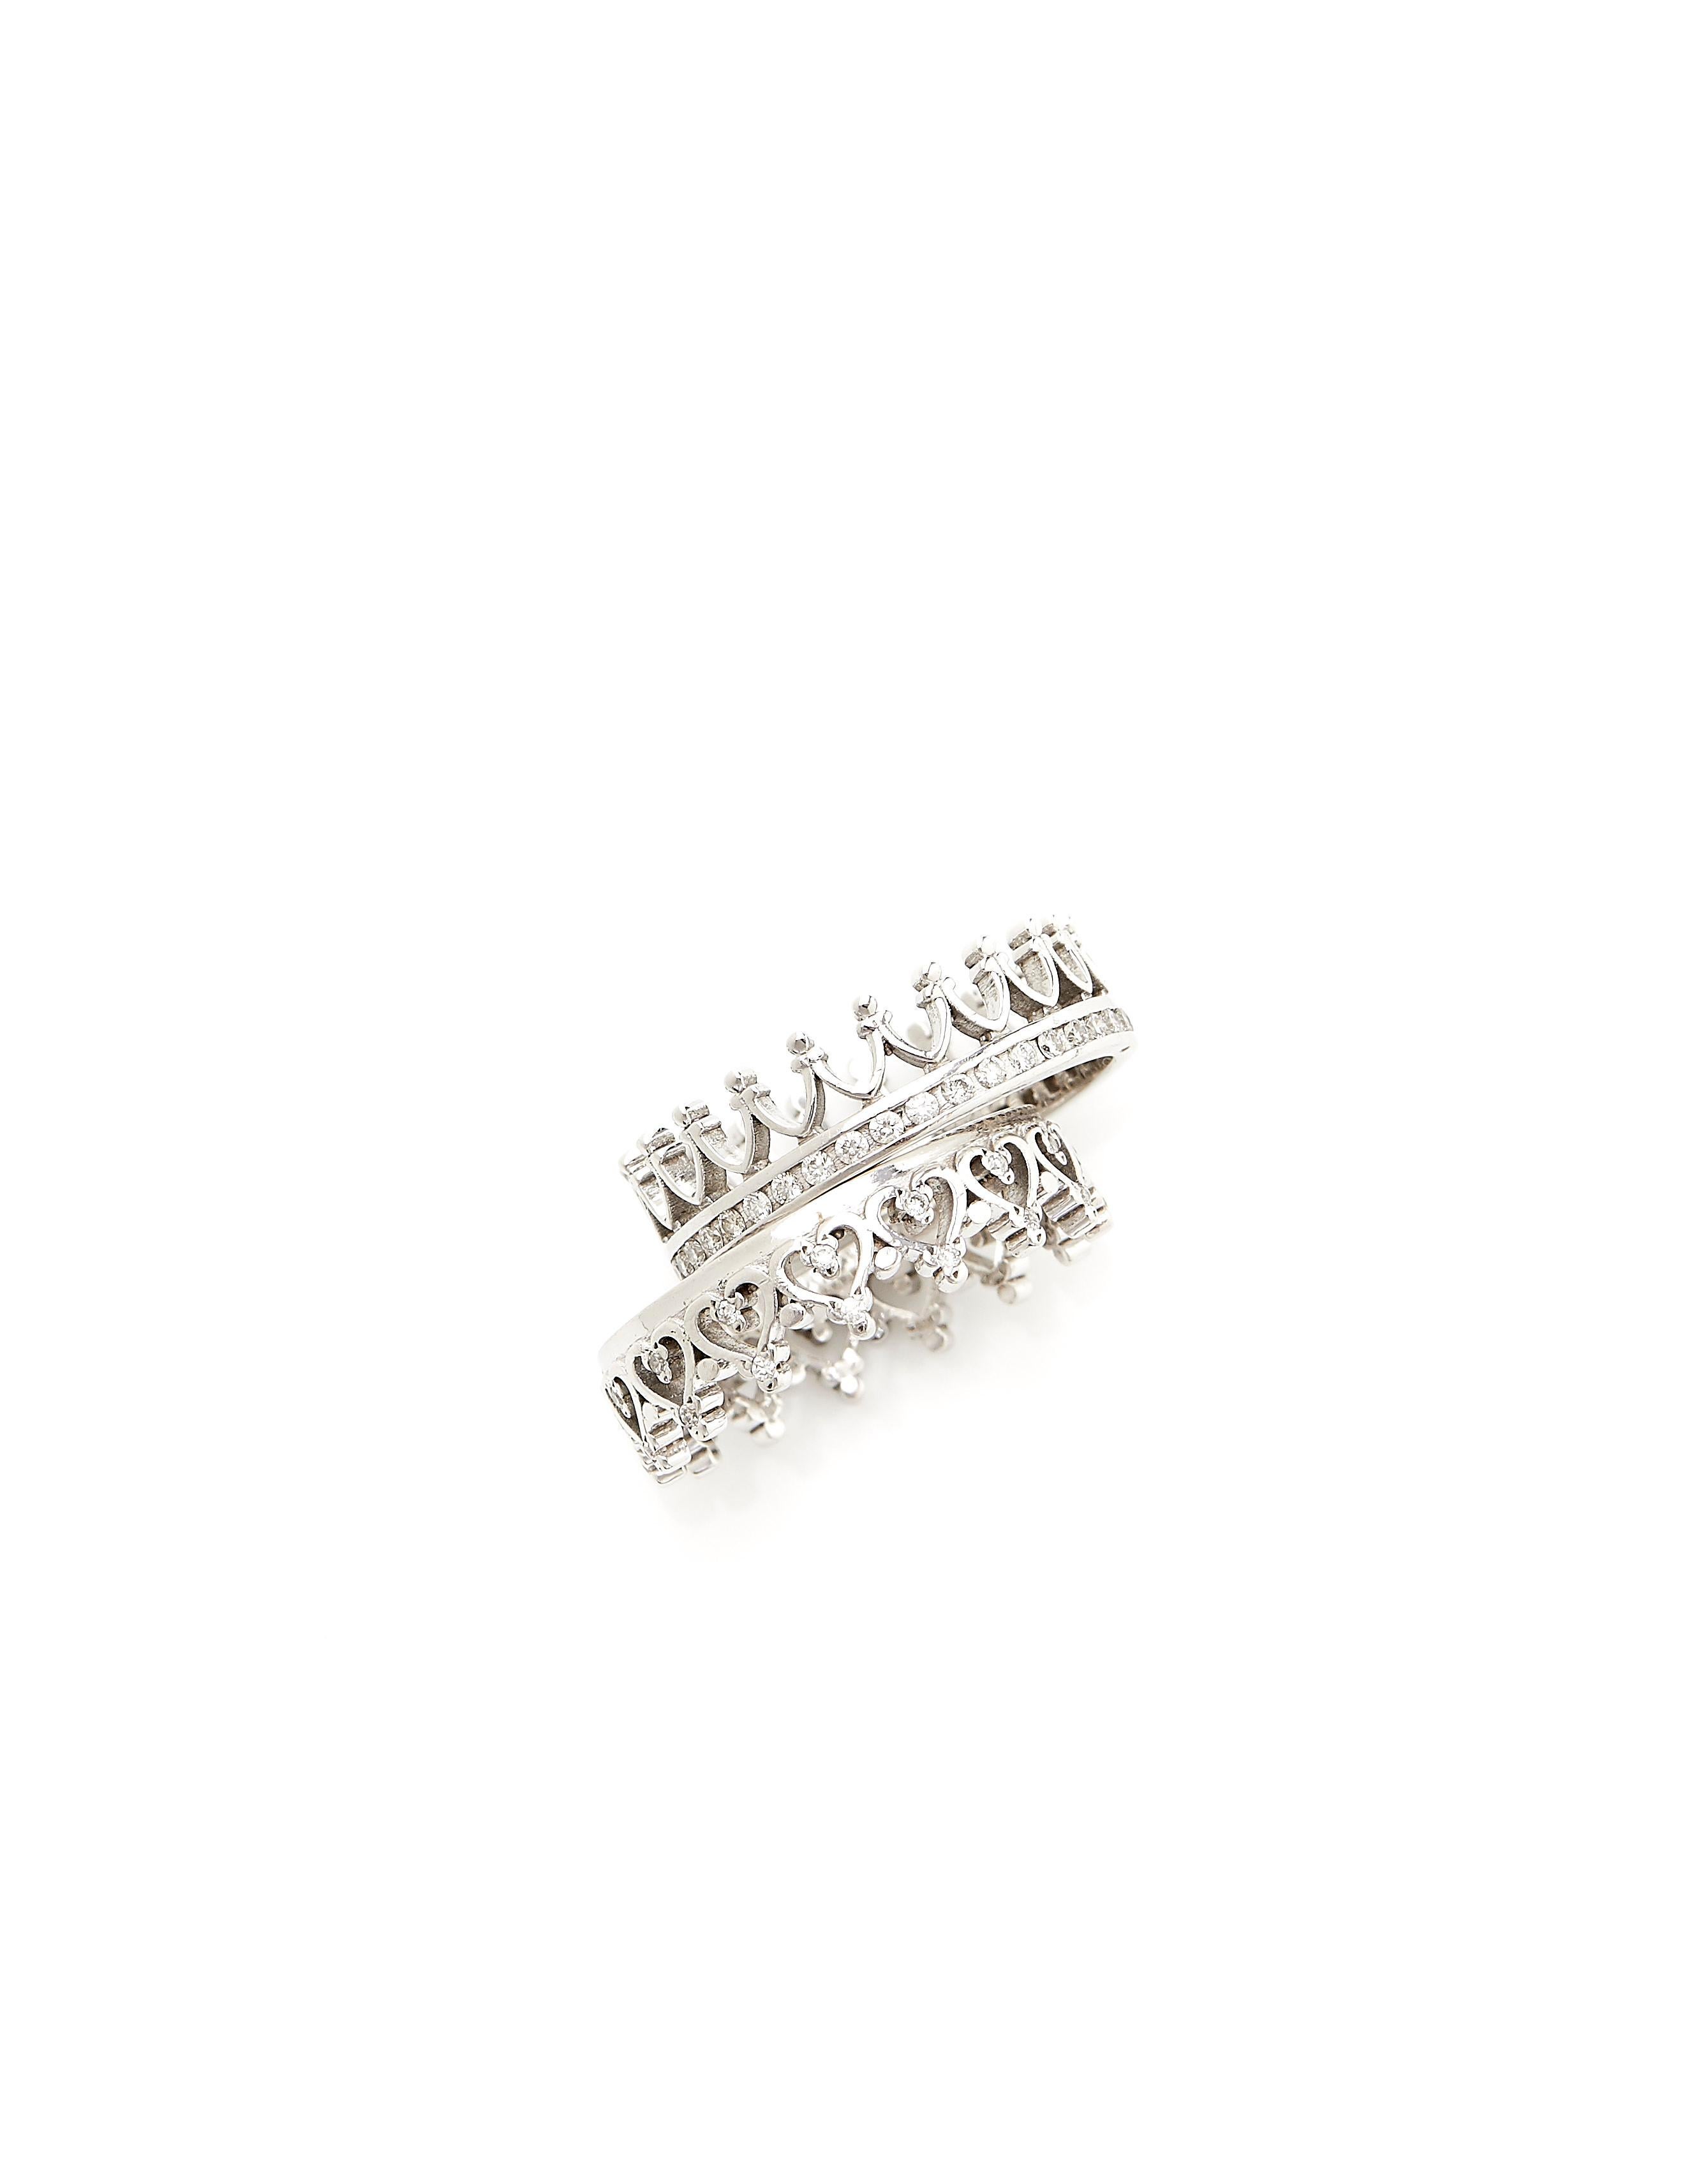 Brilliant Cut 18 Karat White Gold Fashion or Wedding Ring With a Row of 0.41 Carat Diamonds  For Sale